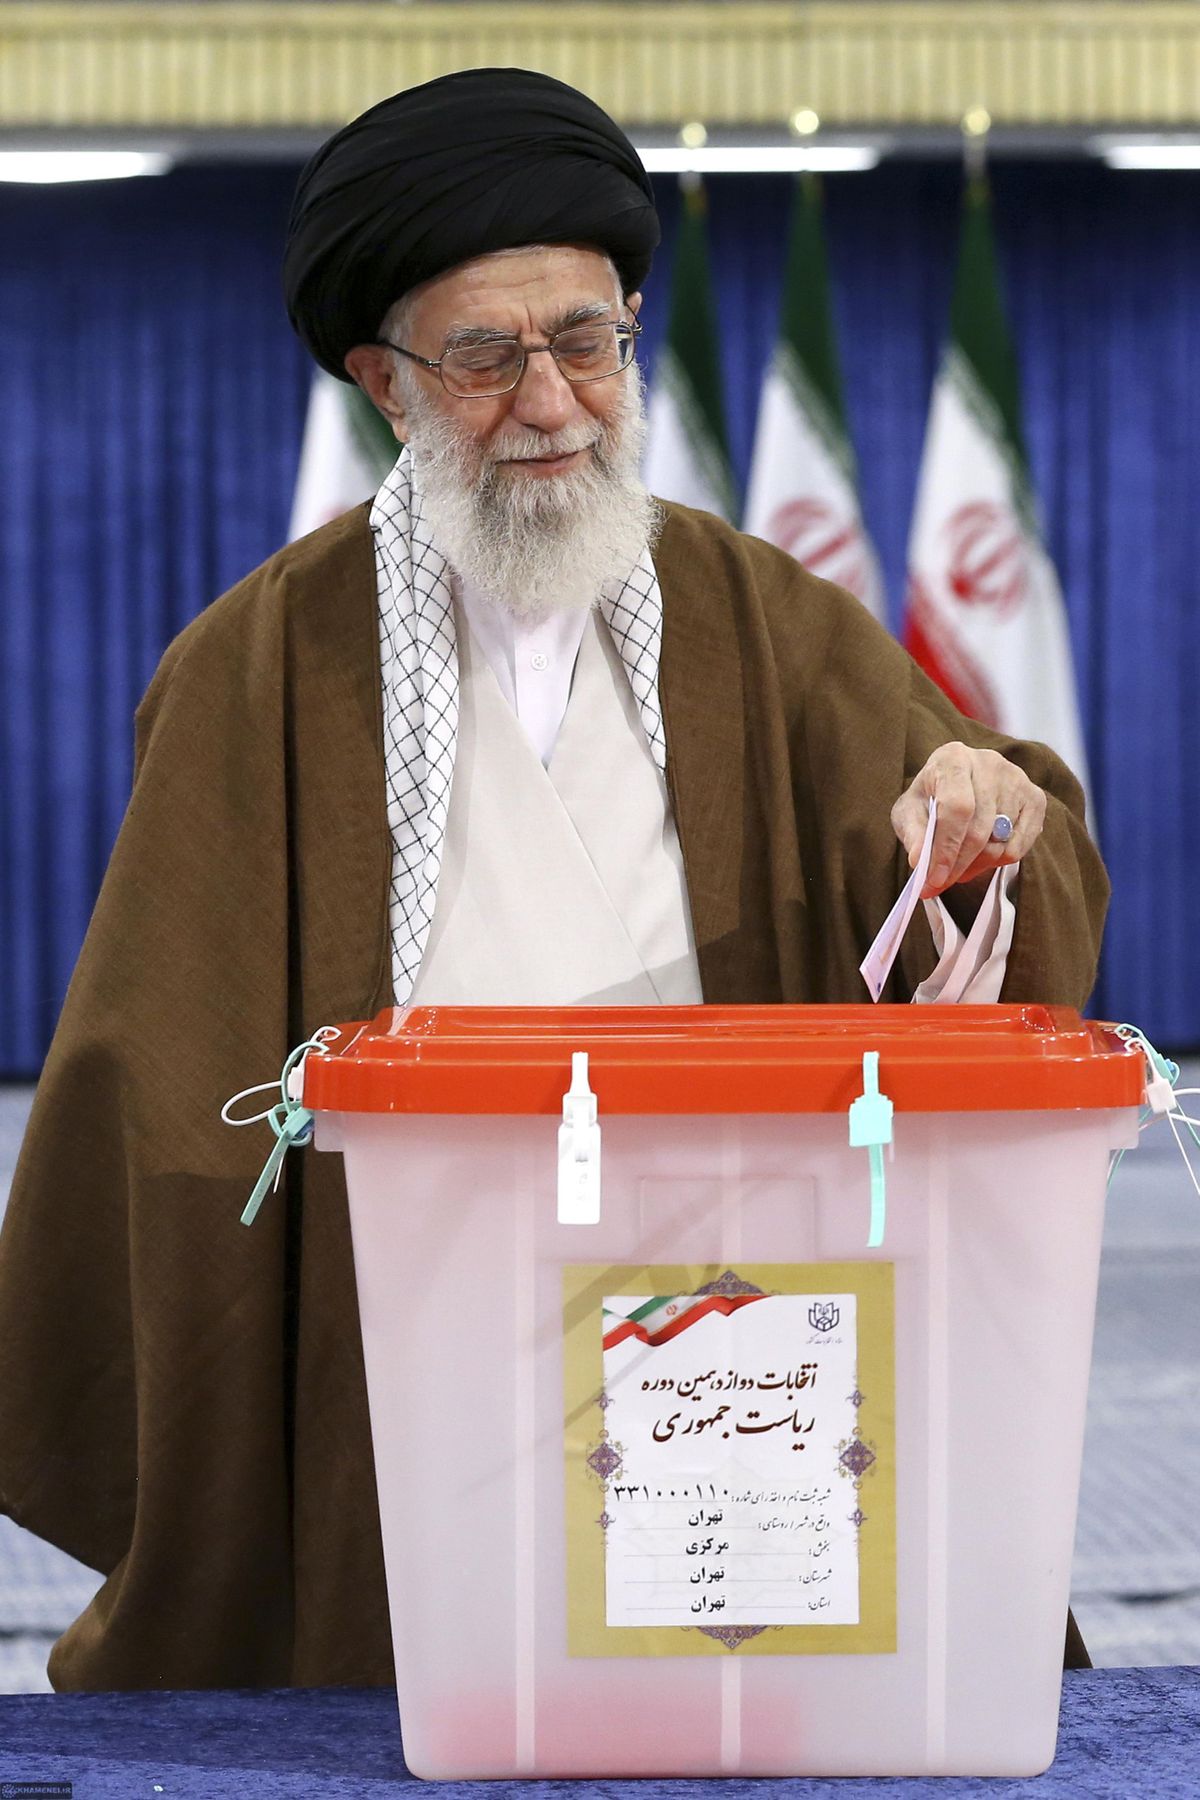 Supreme Leader Ayatollah Ali Khamenei casts his ballot for the presidential election in Tehran, Iran, Friday, May 19, 2017. Iranians voted Friday in the country’s first presidential election since its nuclear deal with world powers, and incumbent Hassan Rouhani won a resounding victory. (Uncredited / Office of the Iranian Supreme Leader)